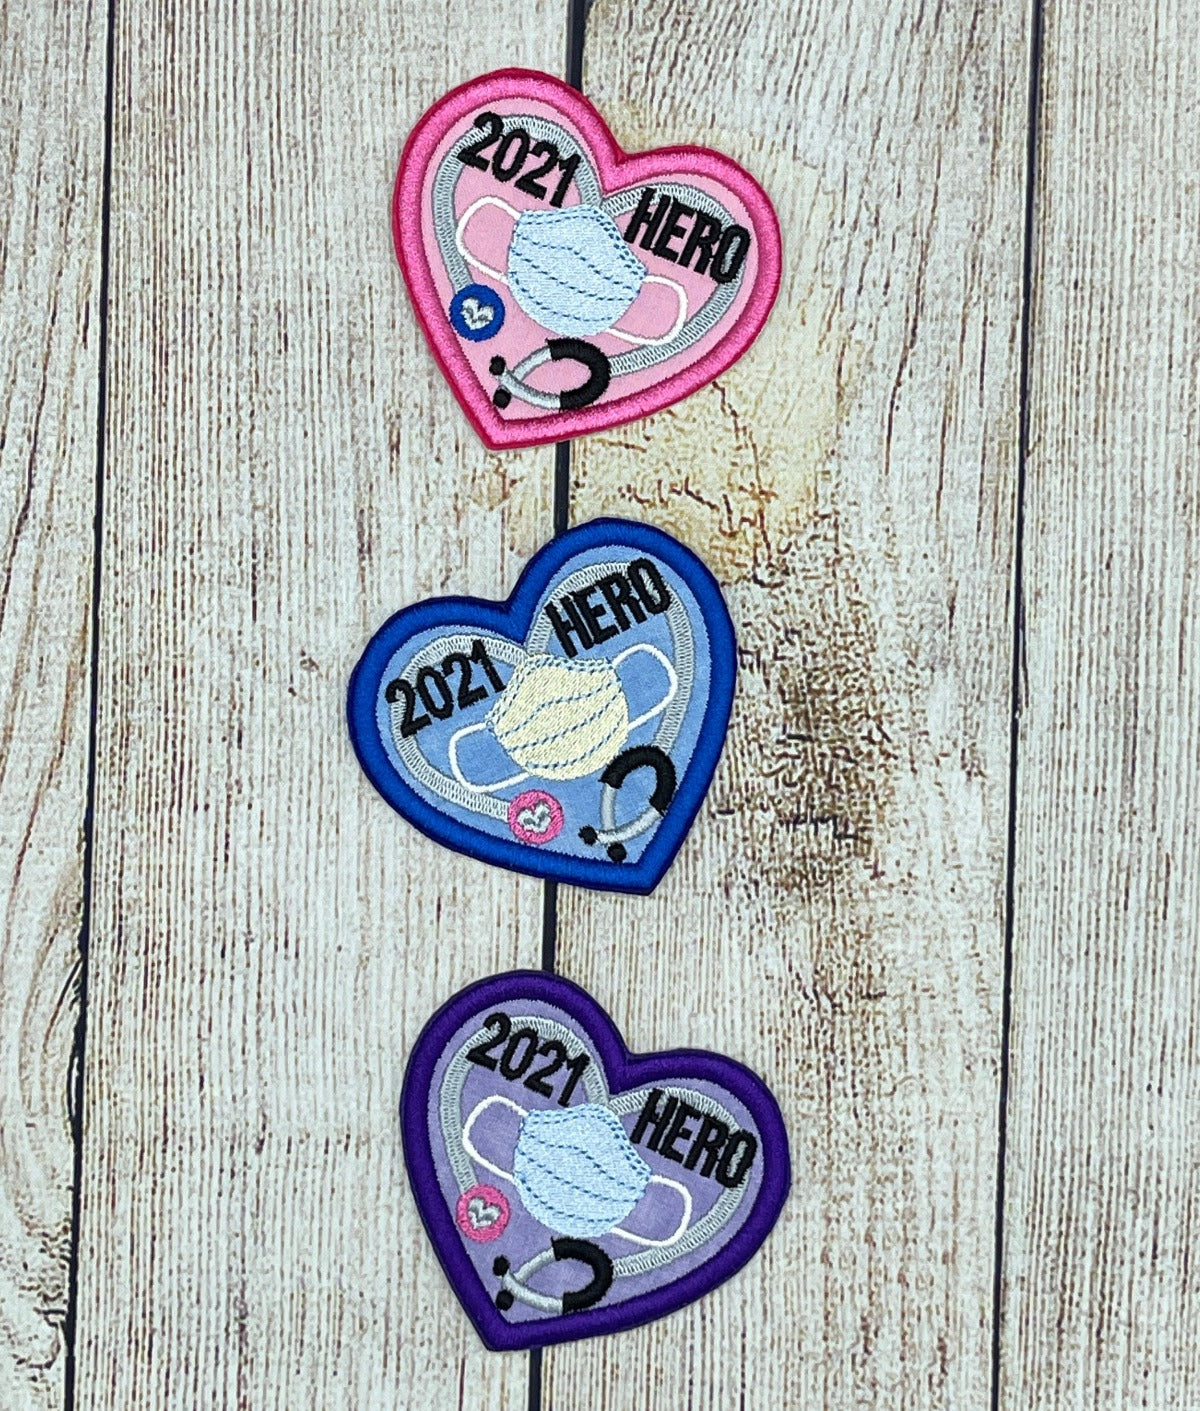 2021 healthcare hero heart patch 3 choices